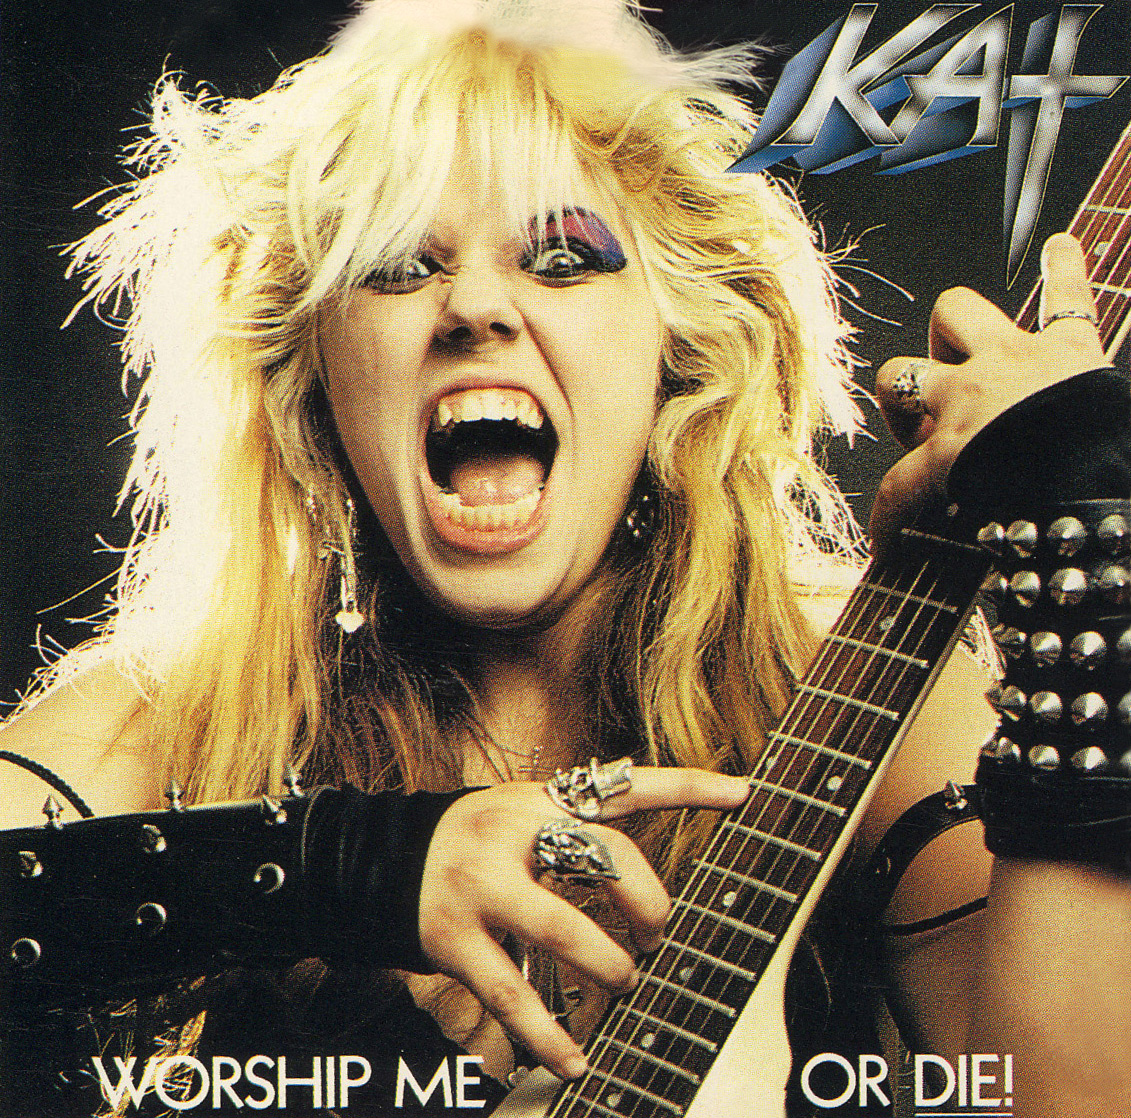 RAVE PRESS REVIEWS ON THE GREAT KAT METAL LEGEND!